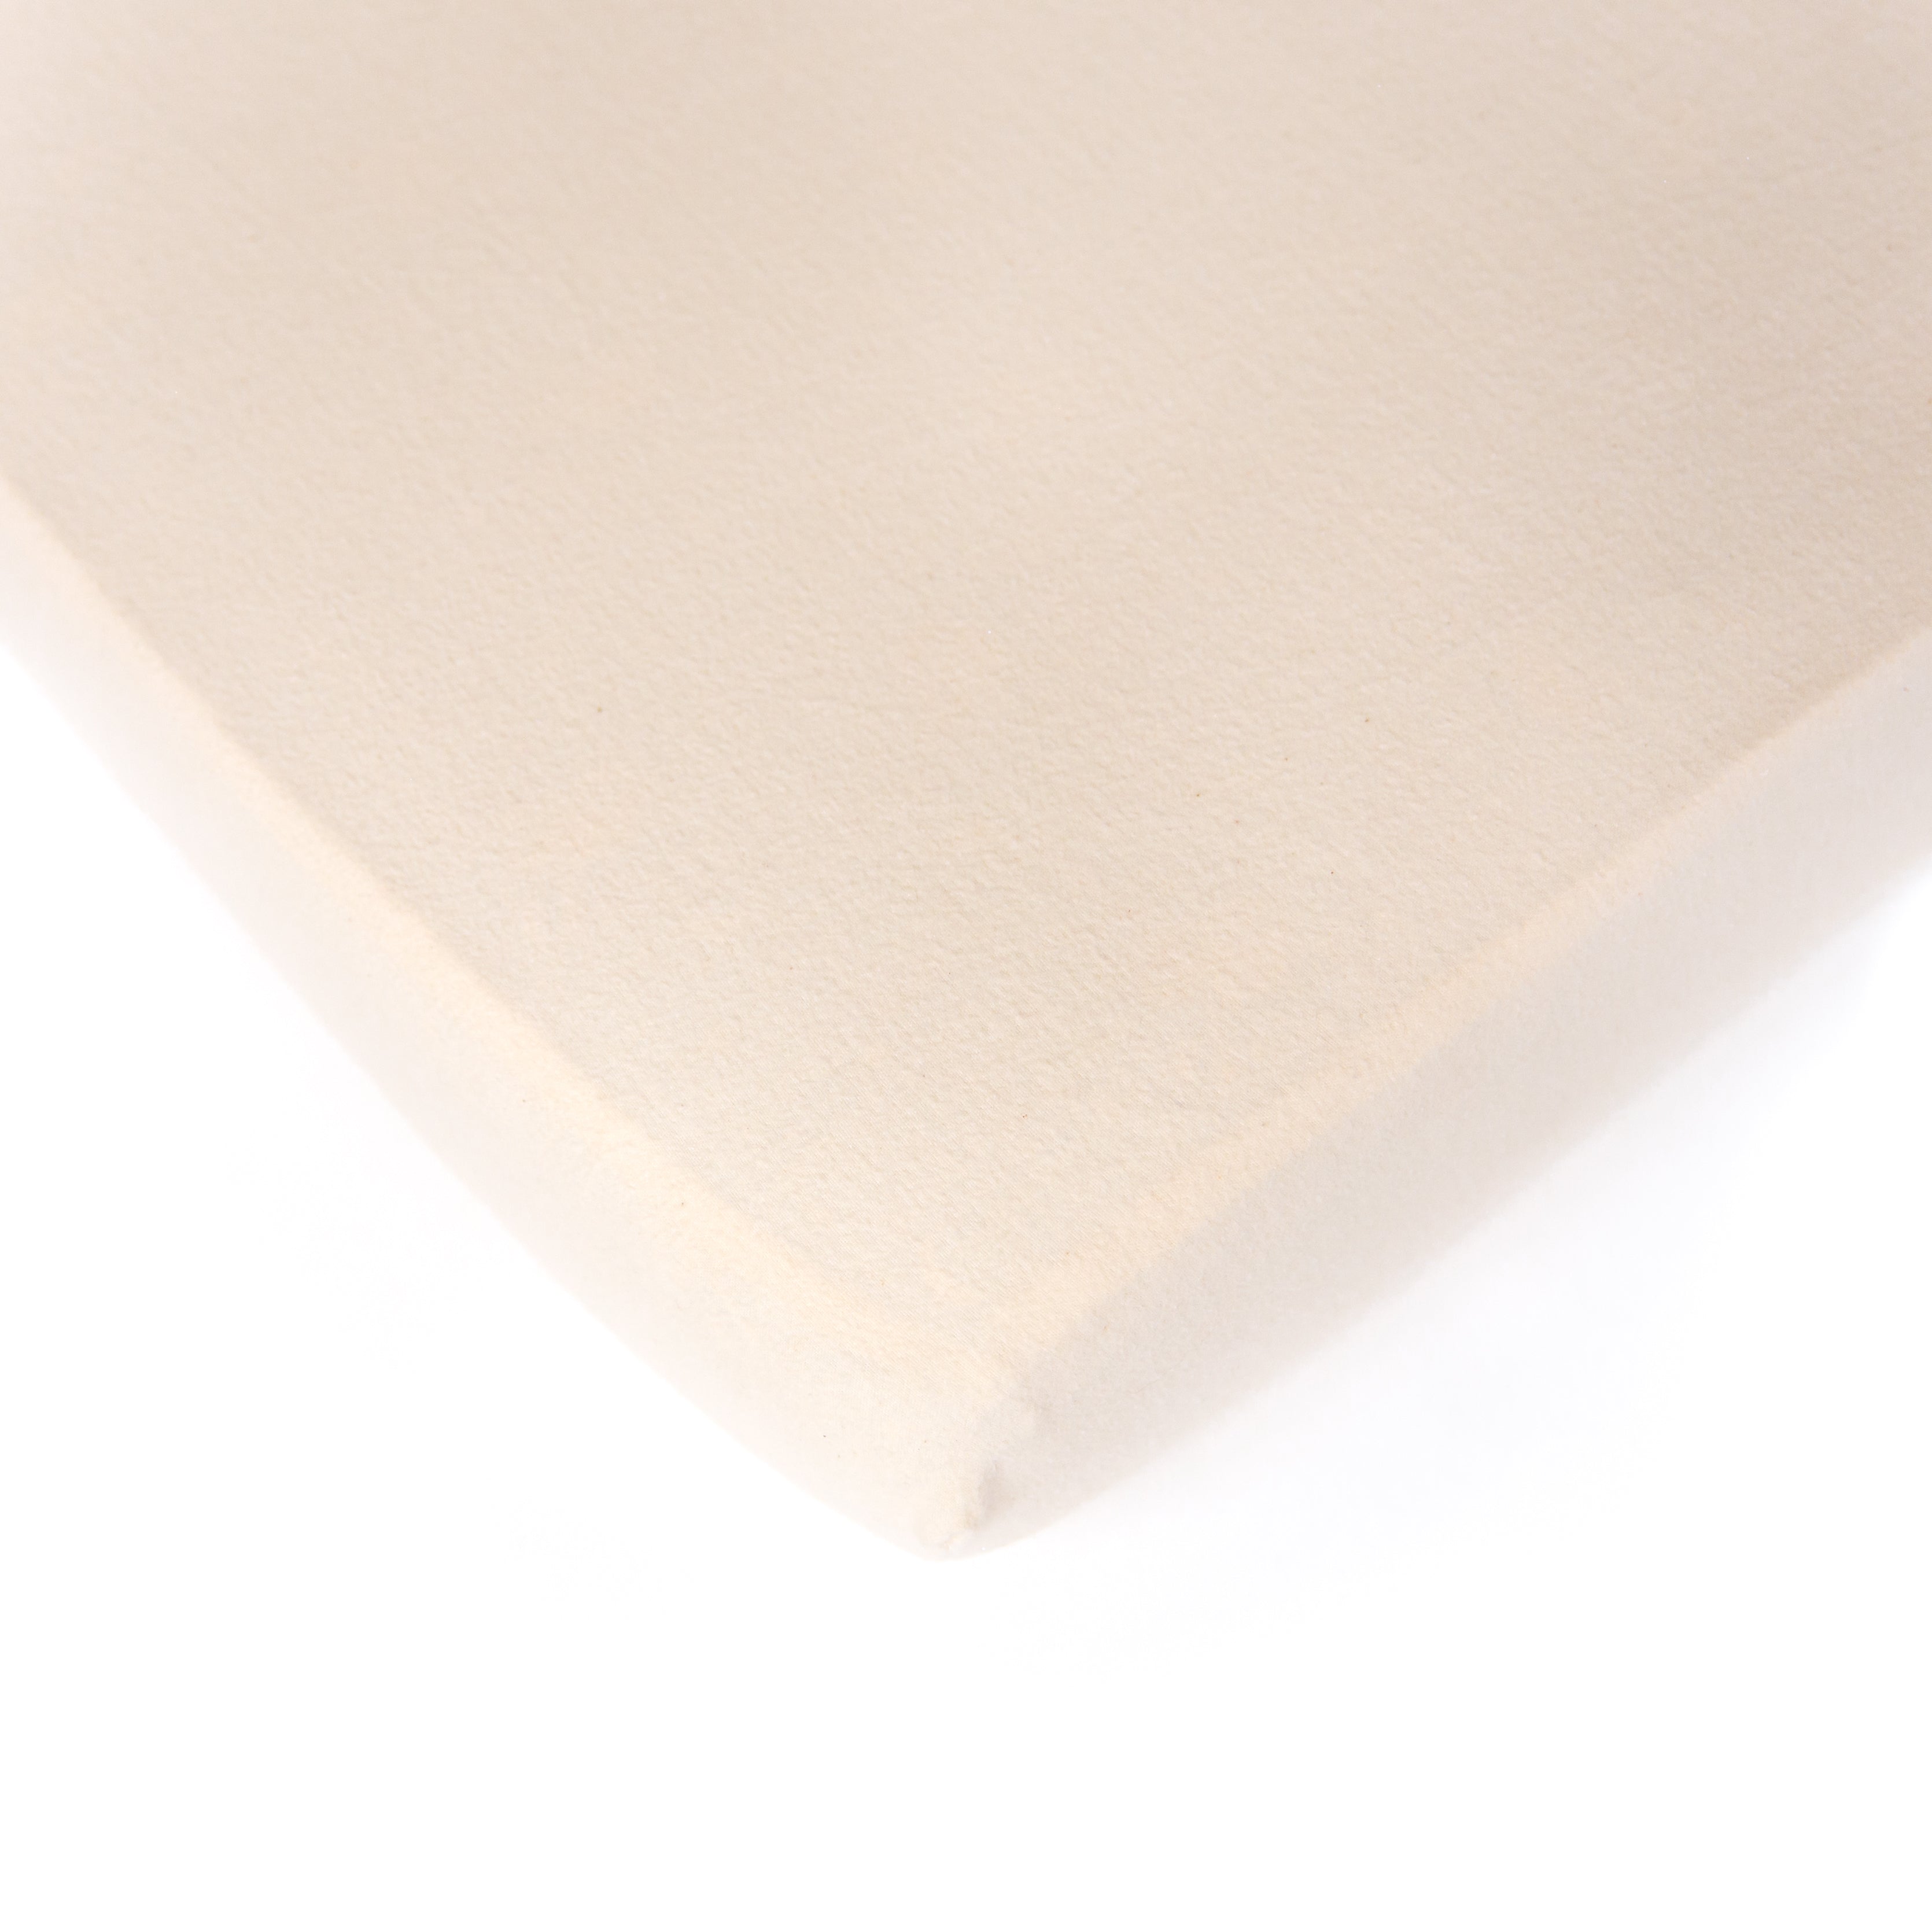 A natural, flannel, Oolie organic cotton crib sheet, unprinted, revealing its natural, undyed, unbleached color.